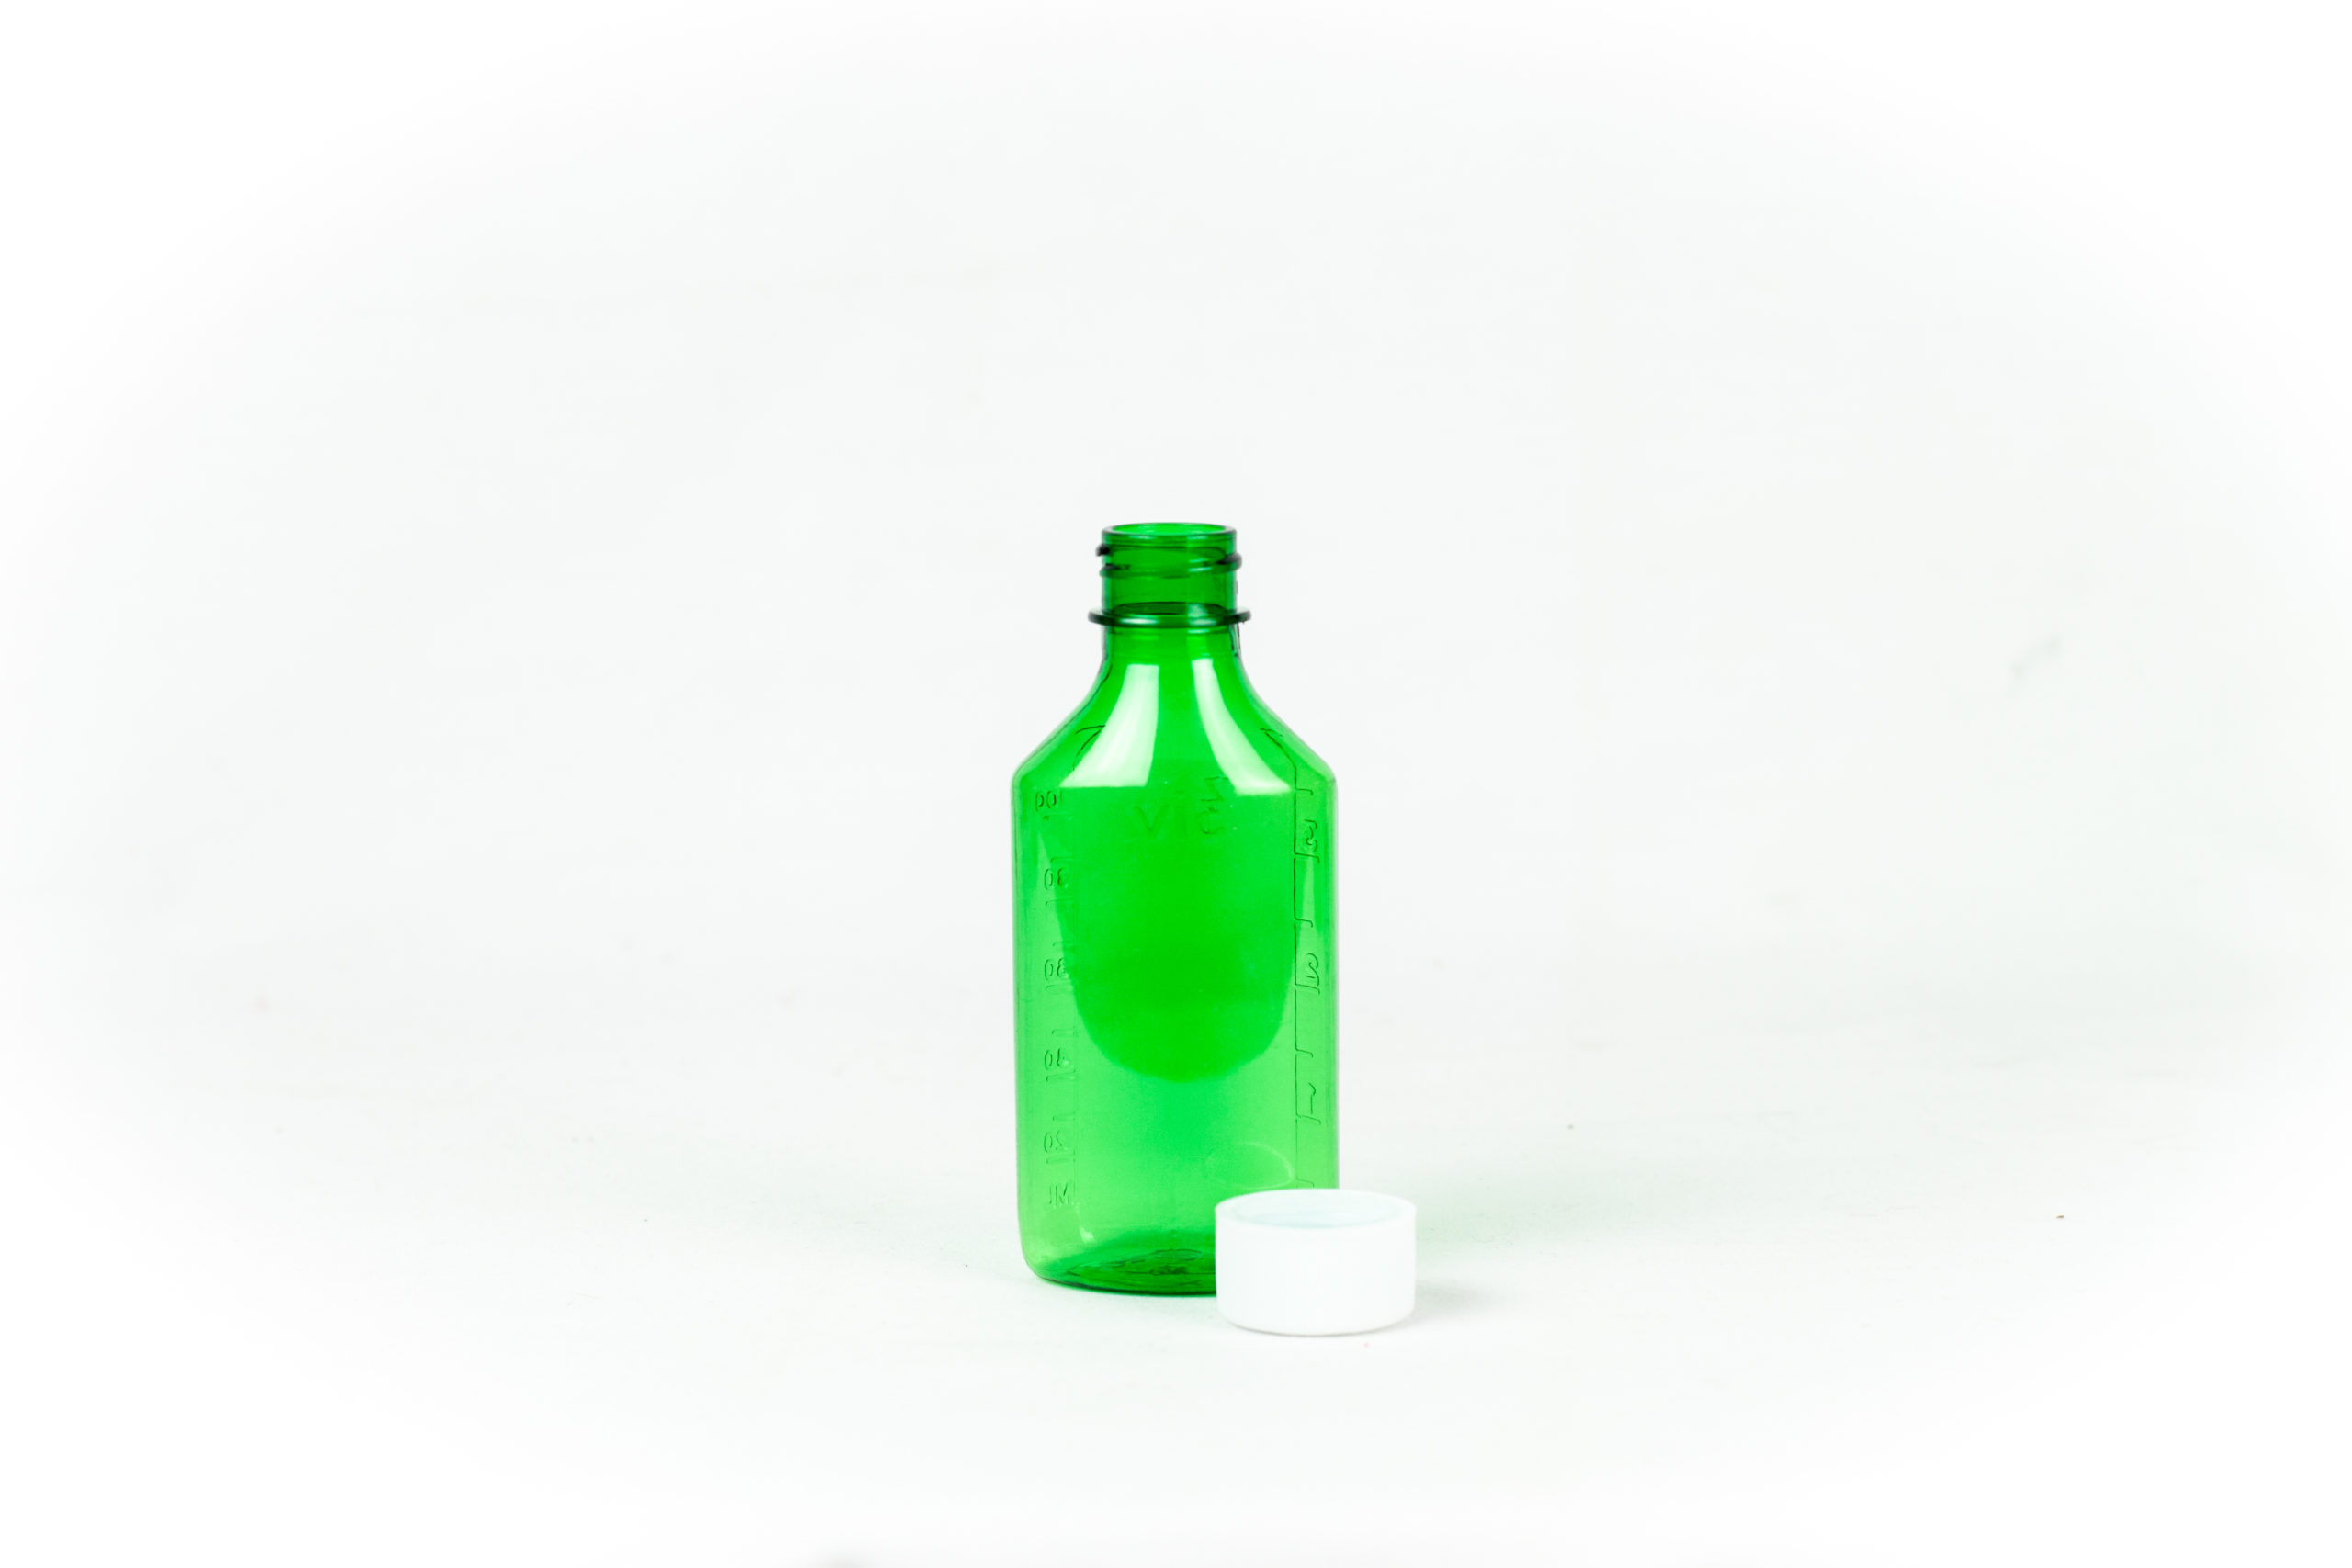 https://www.linepackagingsupplies.com/wp-content/uploads/2017/08/4-oz-green-graduated-oval-rx-bottles-with-child-resistant-caps-1-scaled.jpg